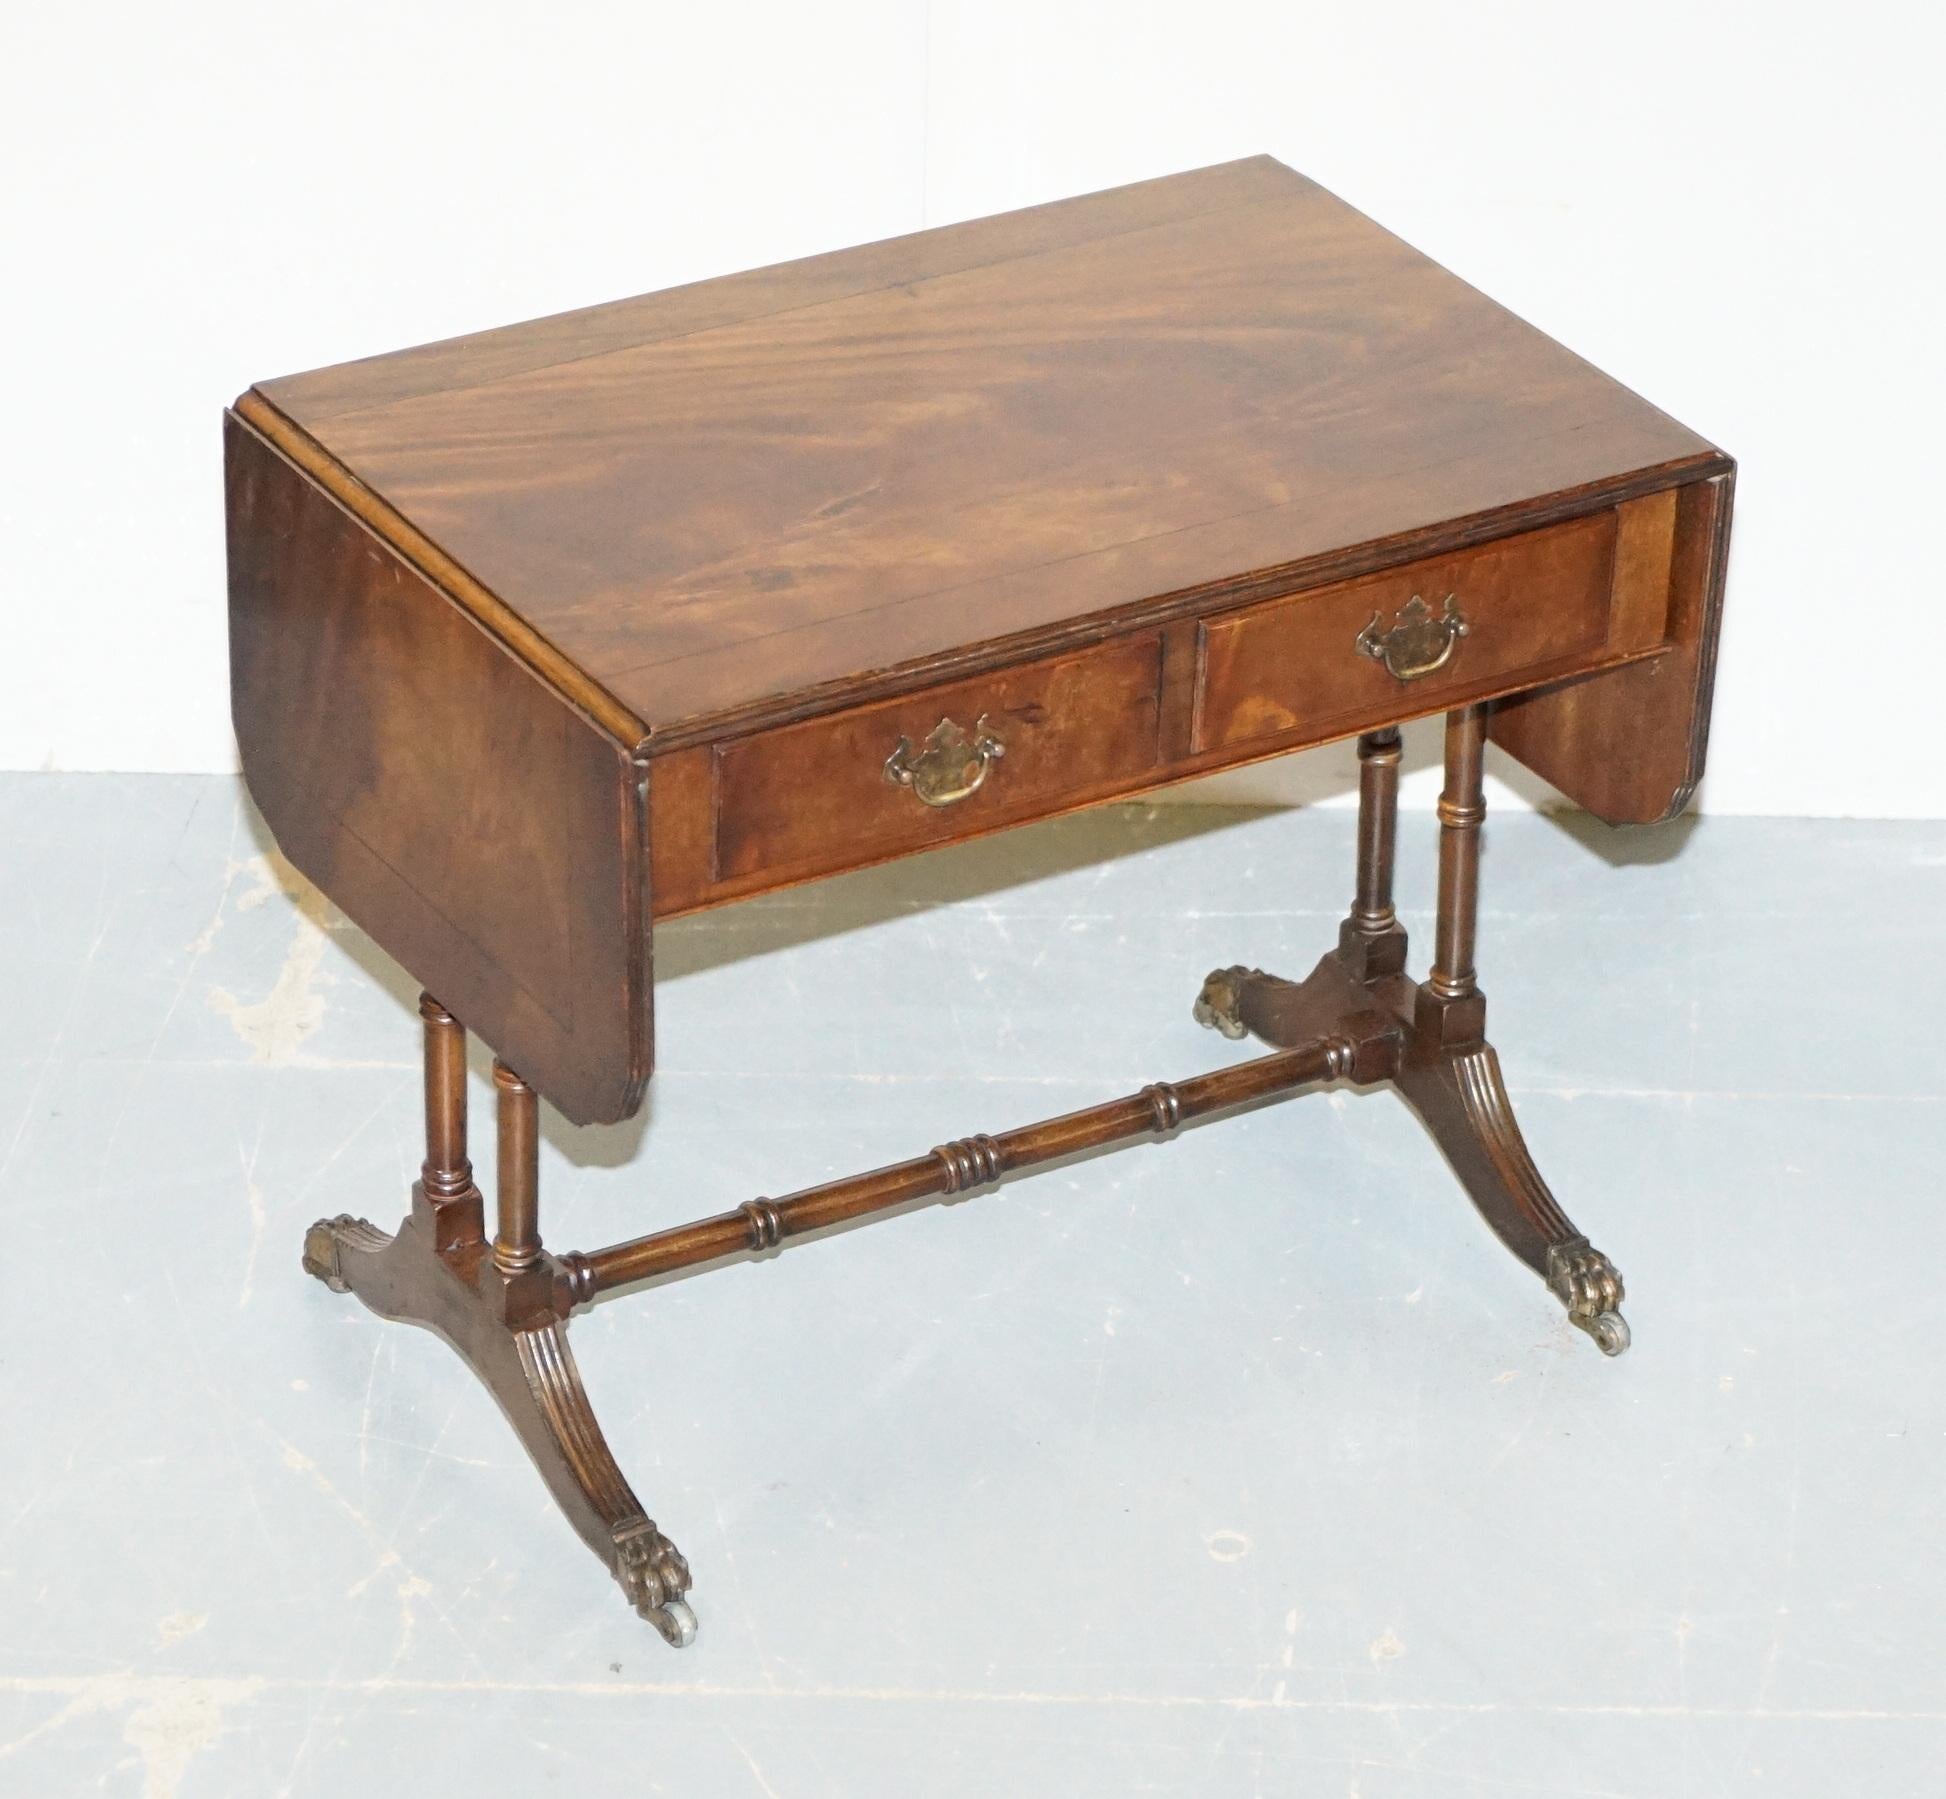 We are delighted to offer for sale this lovely condition large vintage Bevan Funnell flamed mahogany extending side table

This is a very well made and versatile piece with a timber patina to die for, its flamed mahogany. Ideal for playing cards